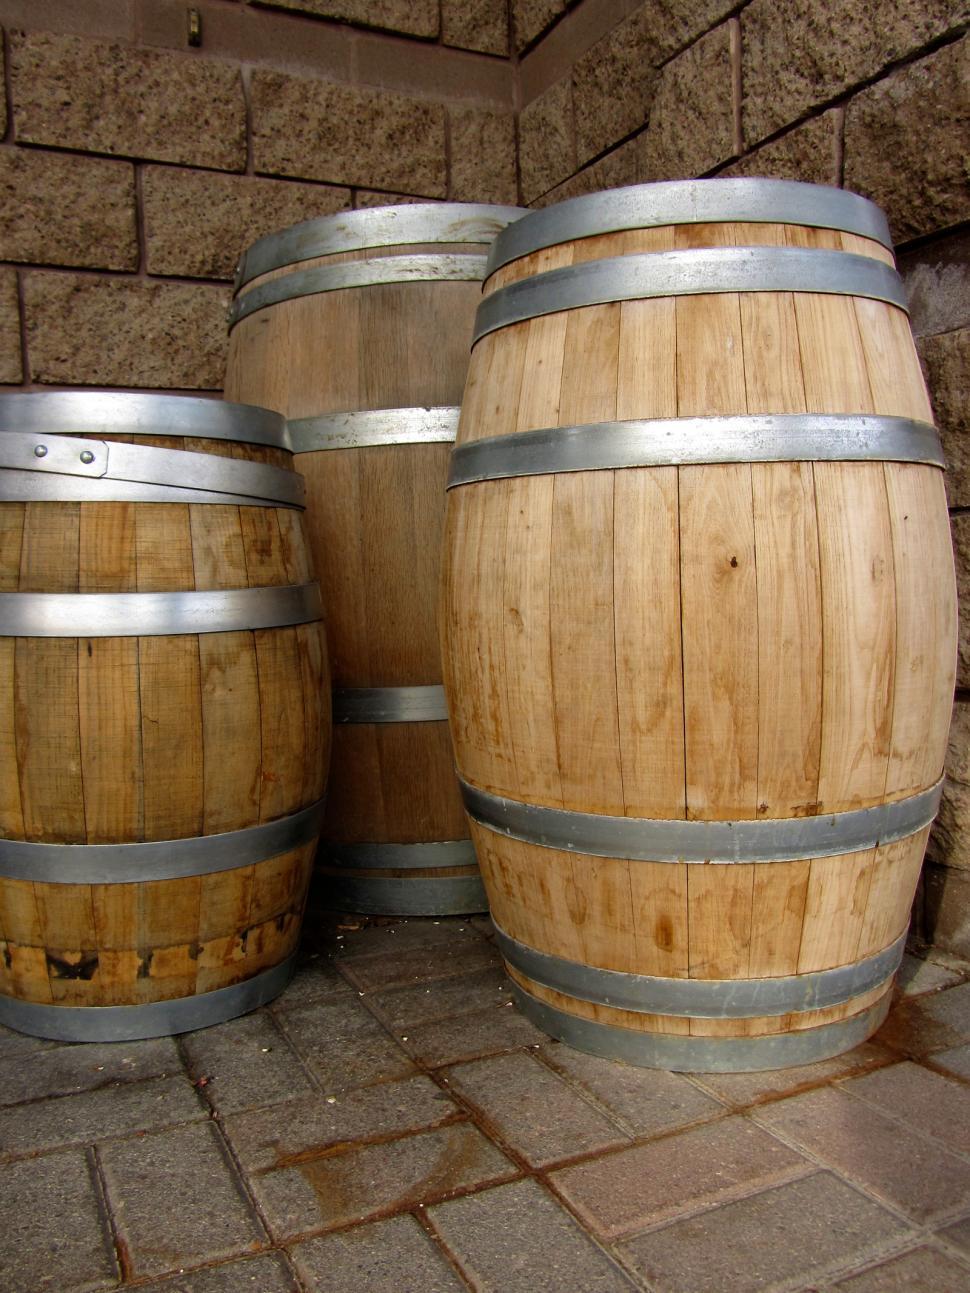 Free Image of Three Wooden Barrels Arranged in a Row 